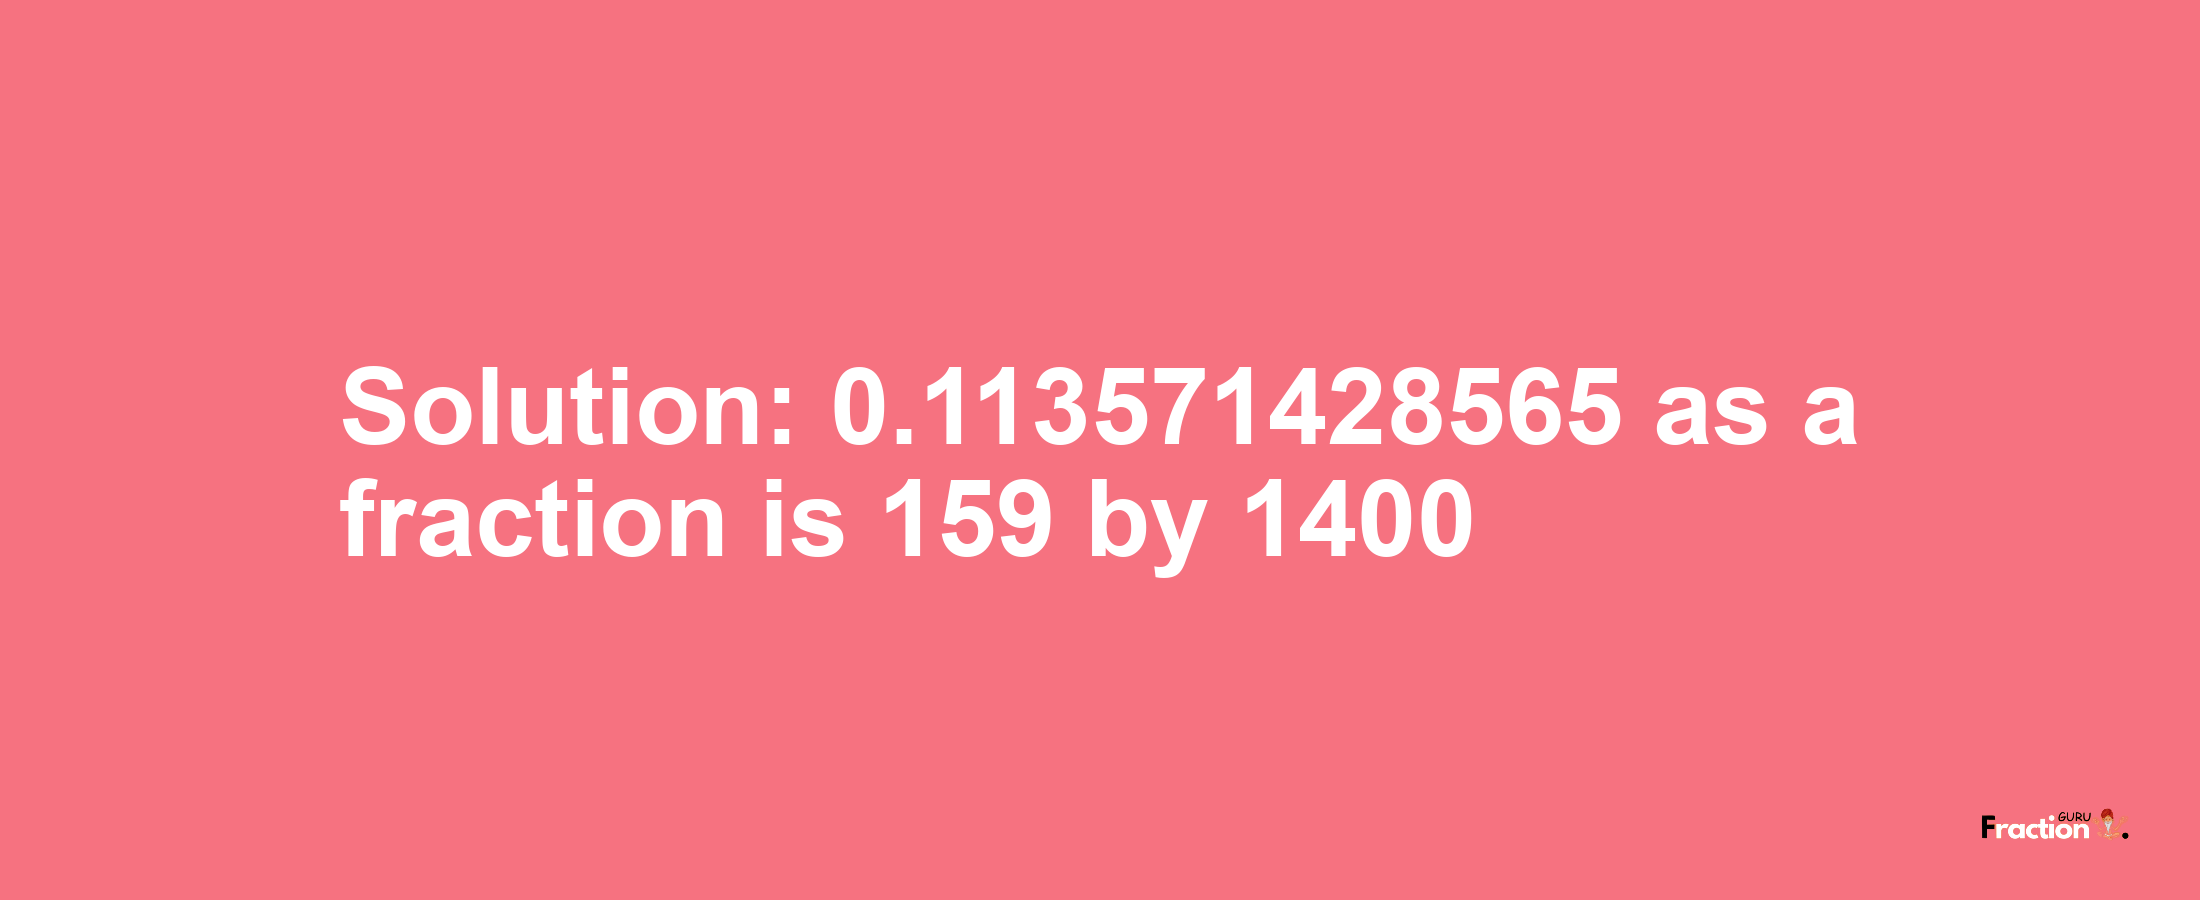 Solution:0.113571428565 as a fraction is 159/1400